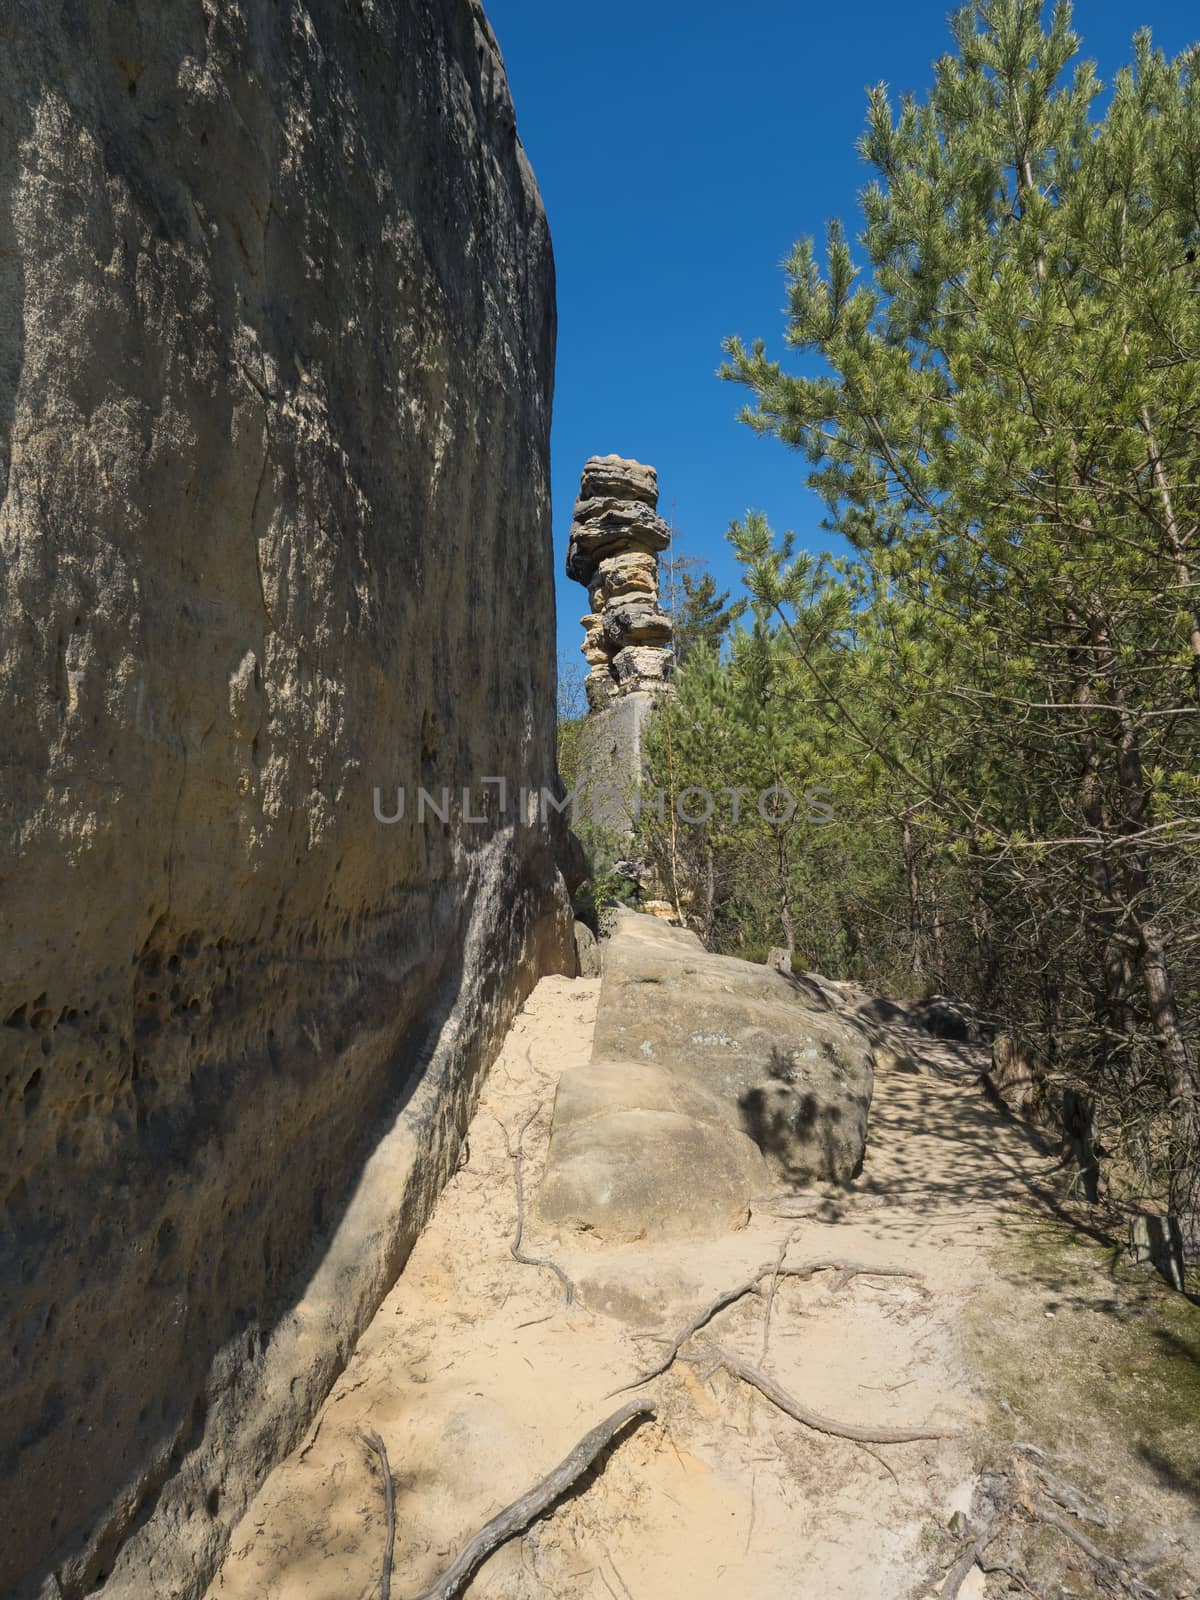 Sandstone rock pillar in spring landscape r Lusatian Mountains with fresh deciduous and spruce tree forest. Blue sky background, copy space.